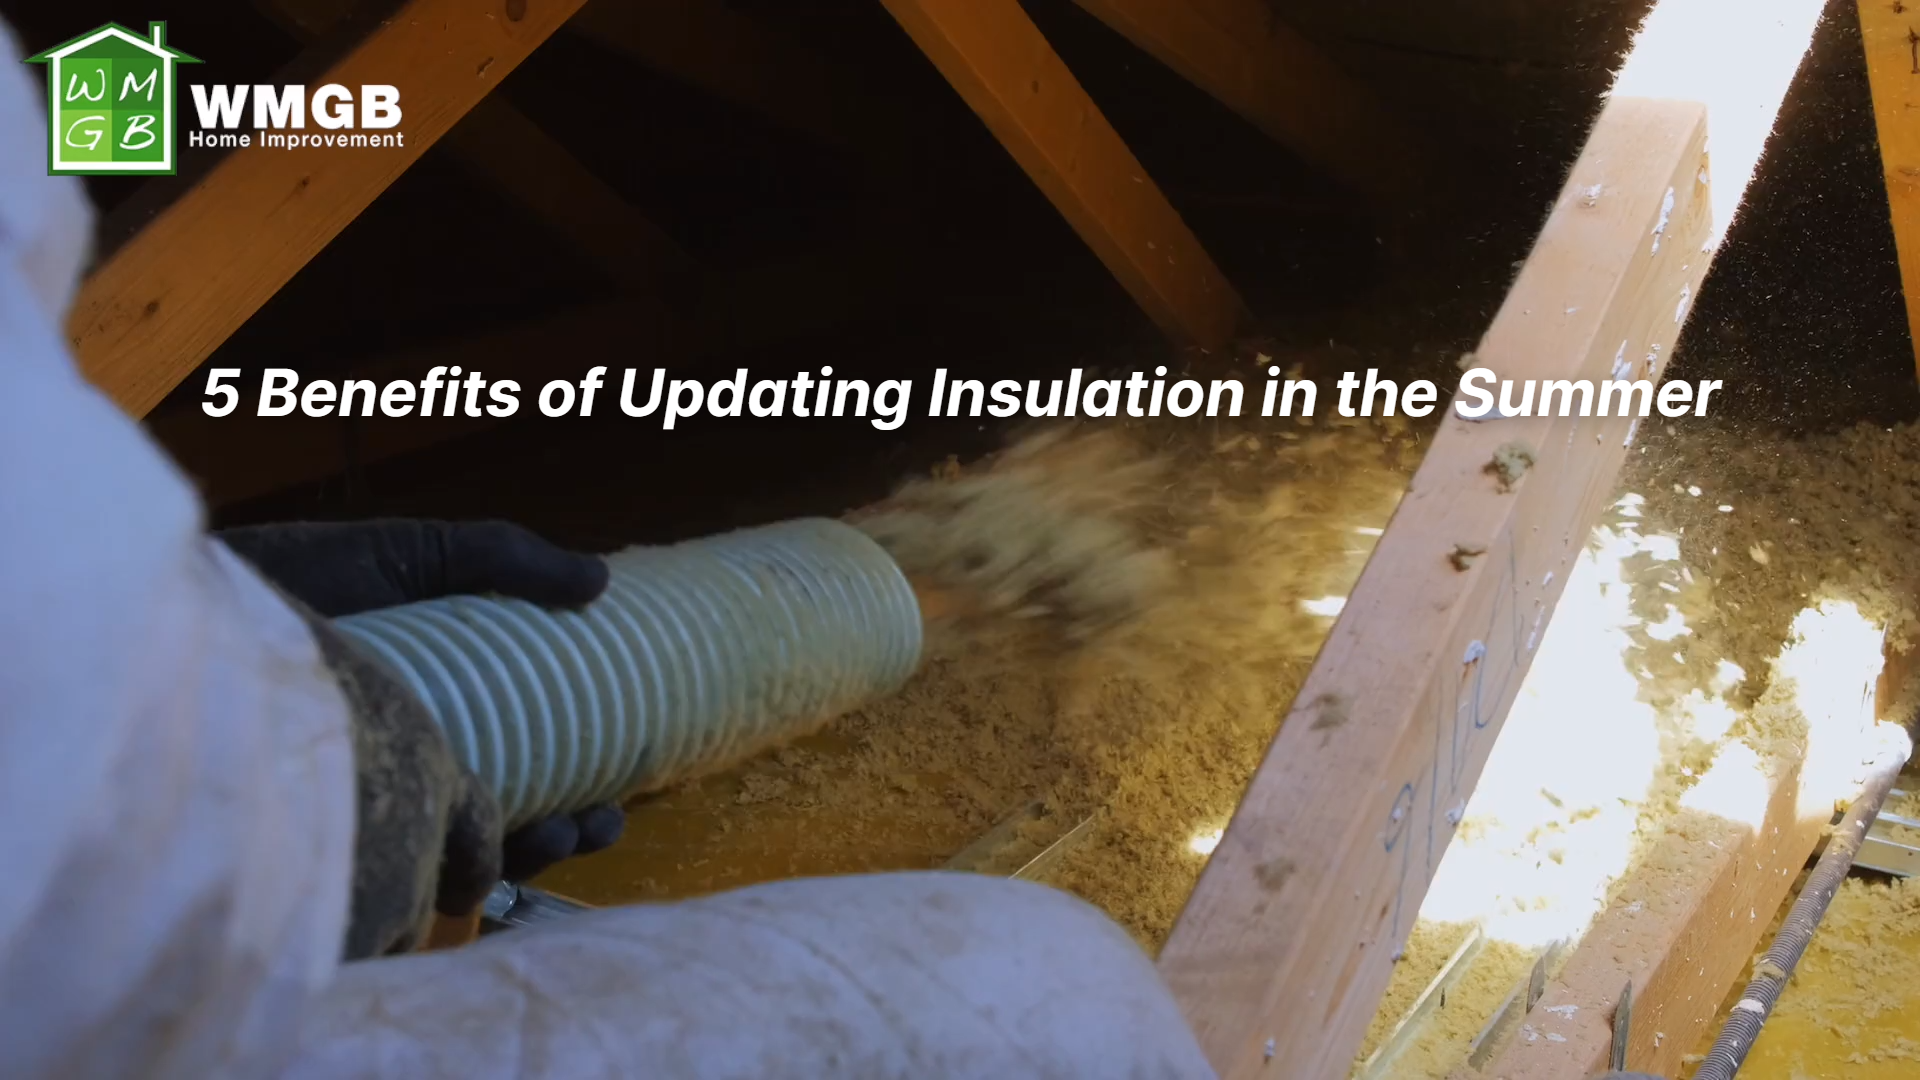 5 Benefits of Updating Insulation in the Summer WMGB